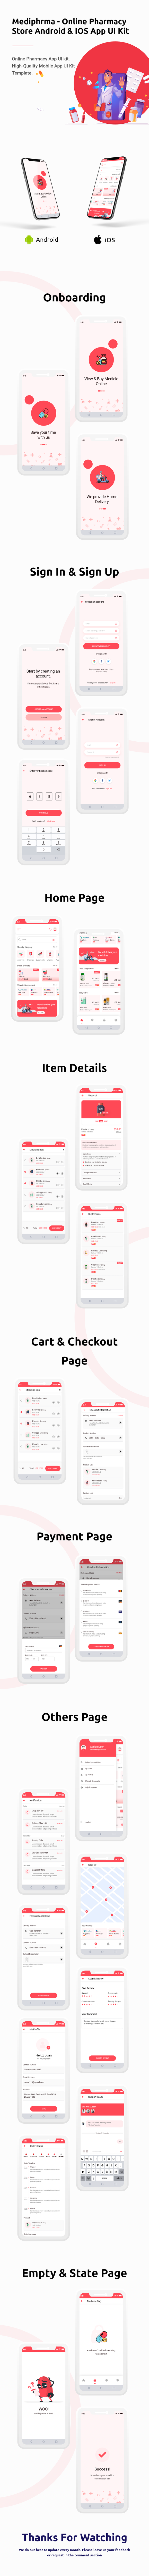 Mediphrma - Online Pharmacy Store Android & IOS UI Kit - 2